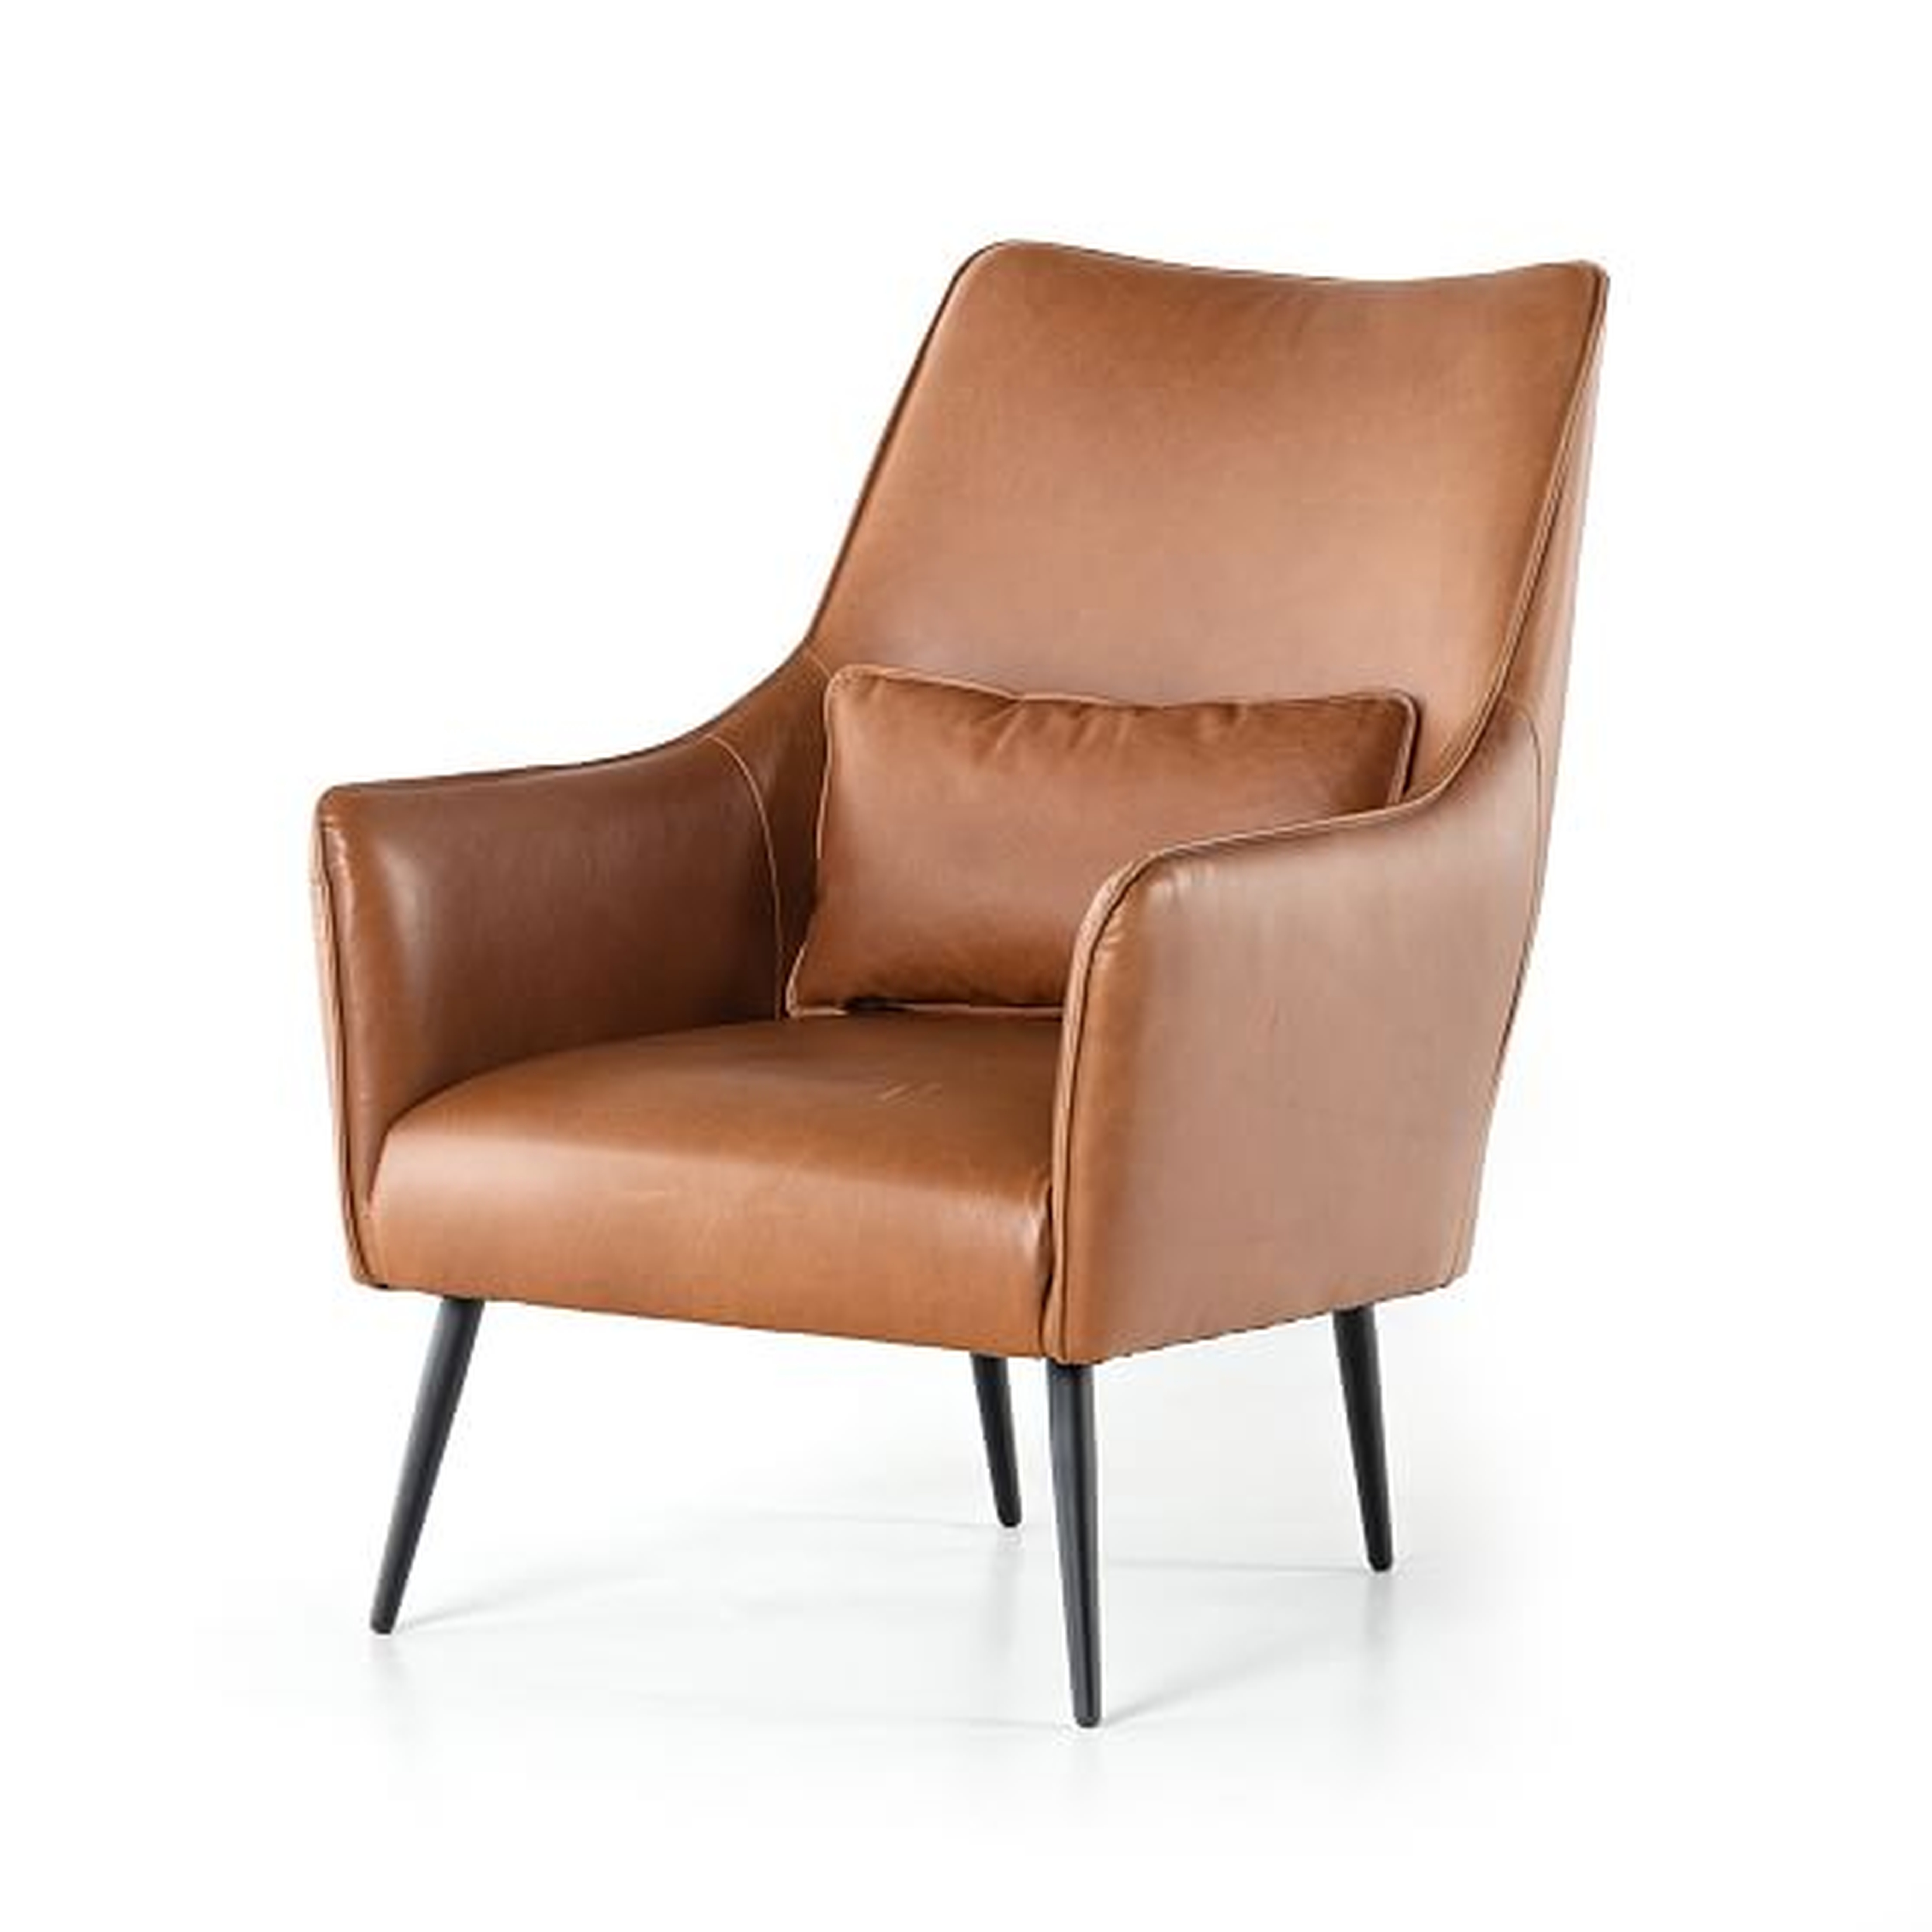 Tall Winged Chair - Vintage Caramel - West Elm